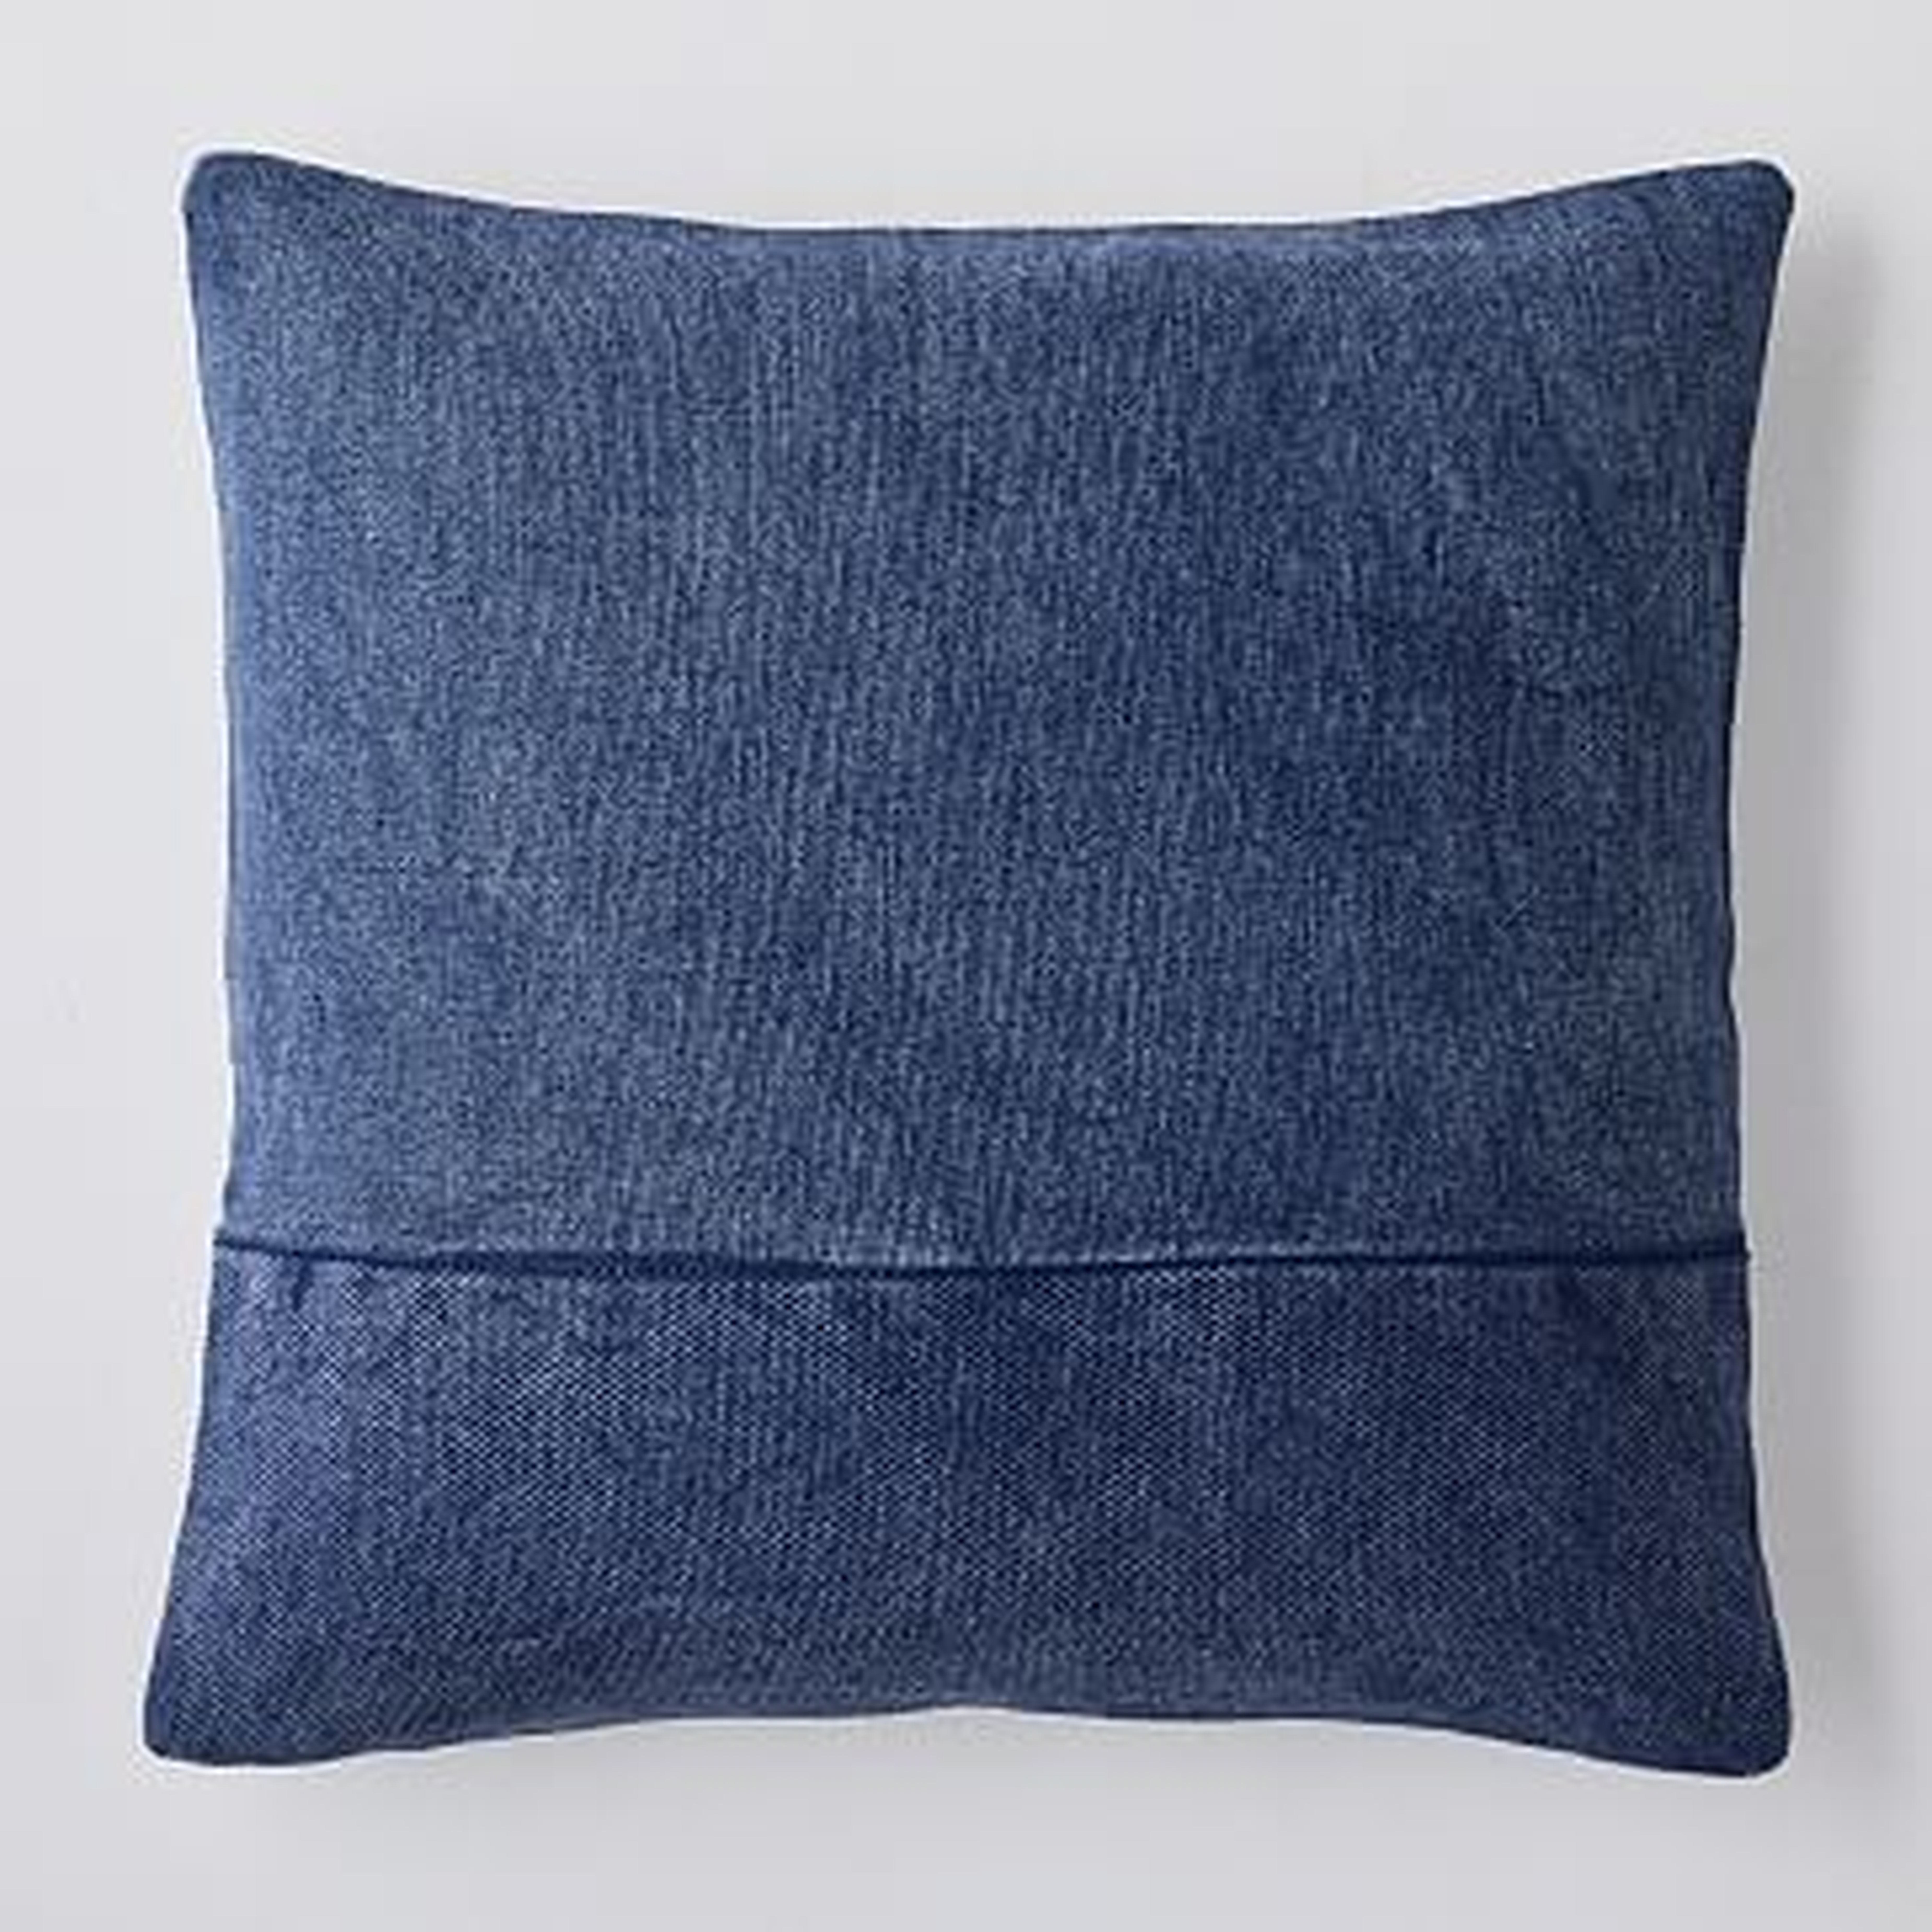 Cotton Canvas Pillow Cover 24"x24", Midnight, Set of 2 - West Elm